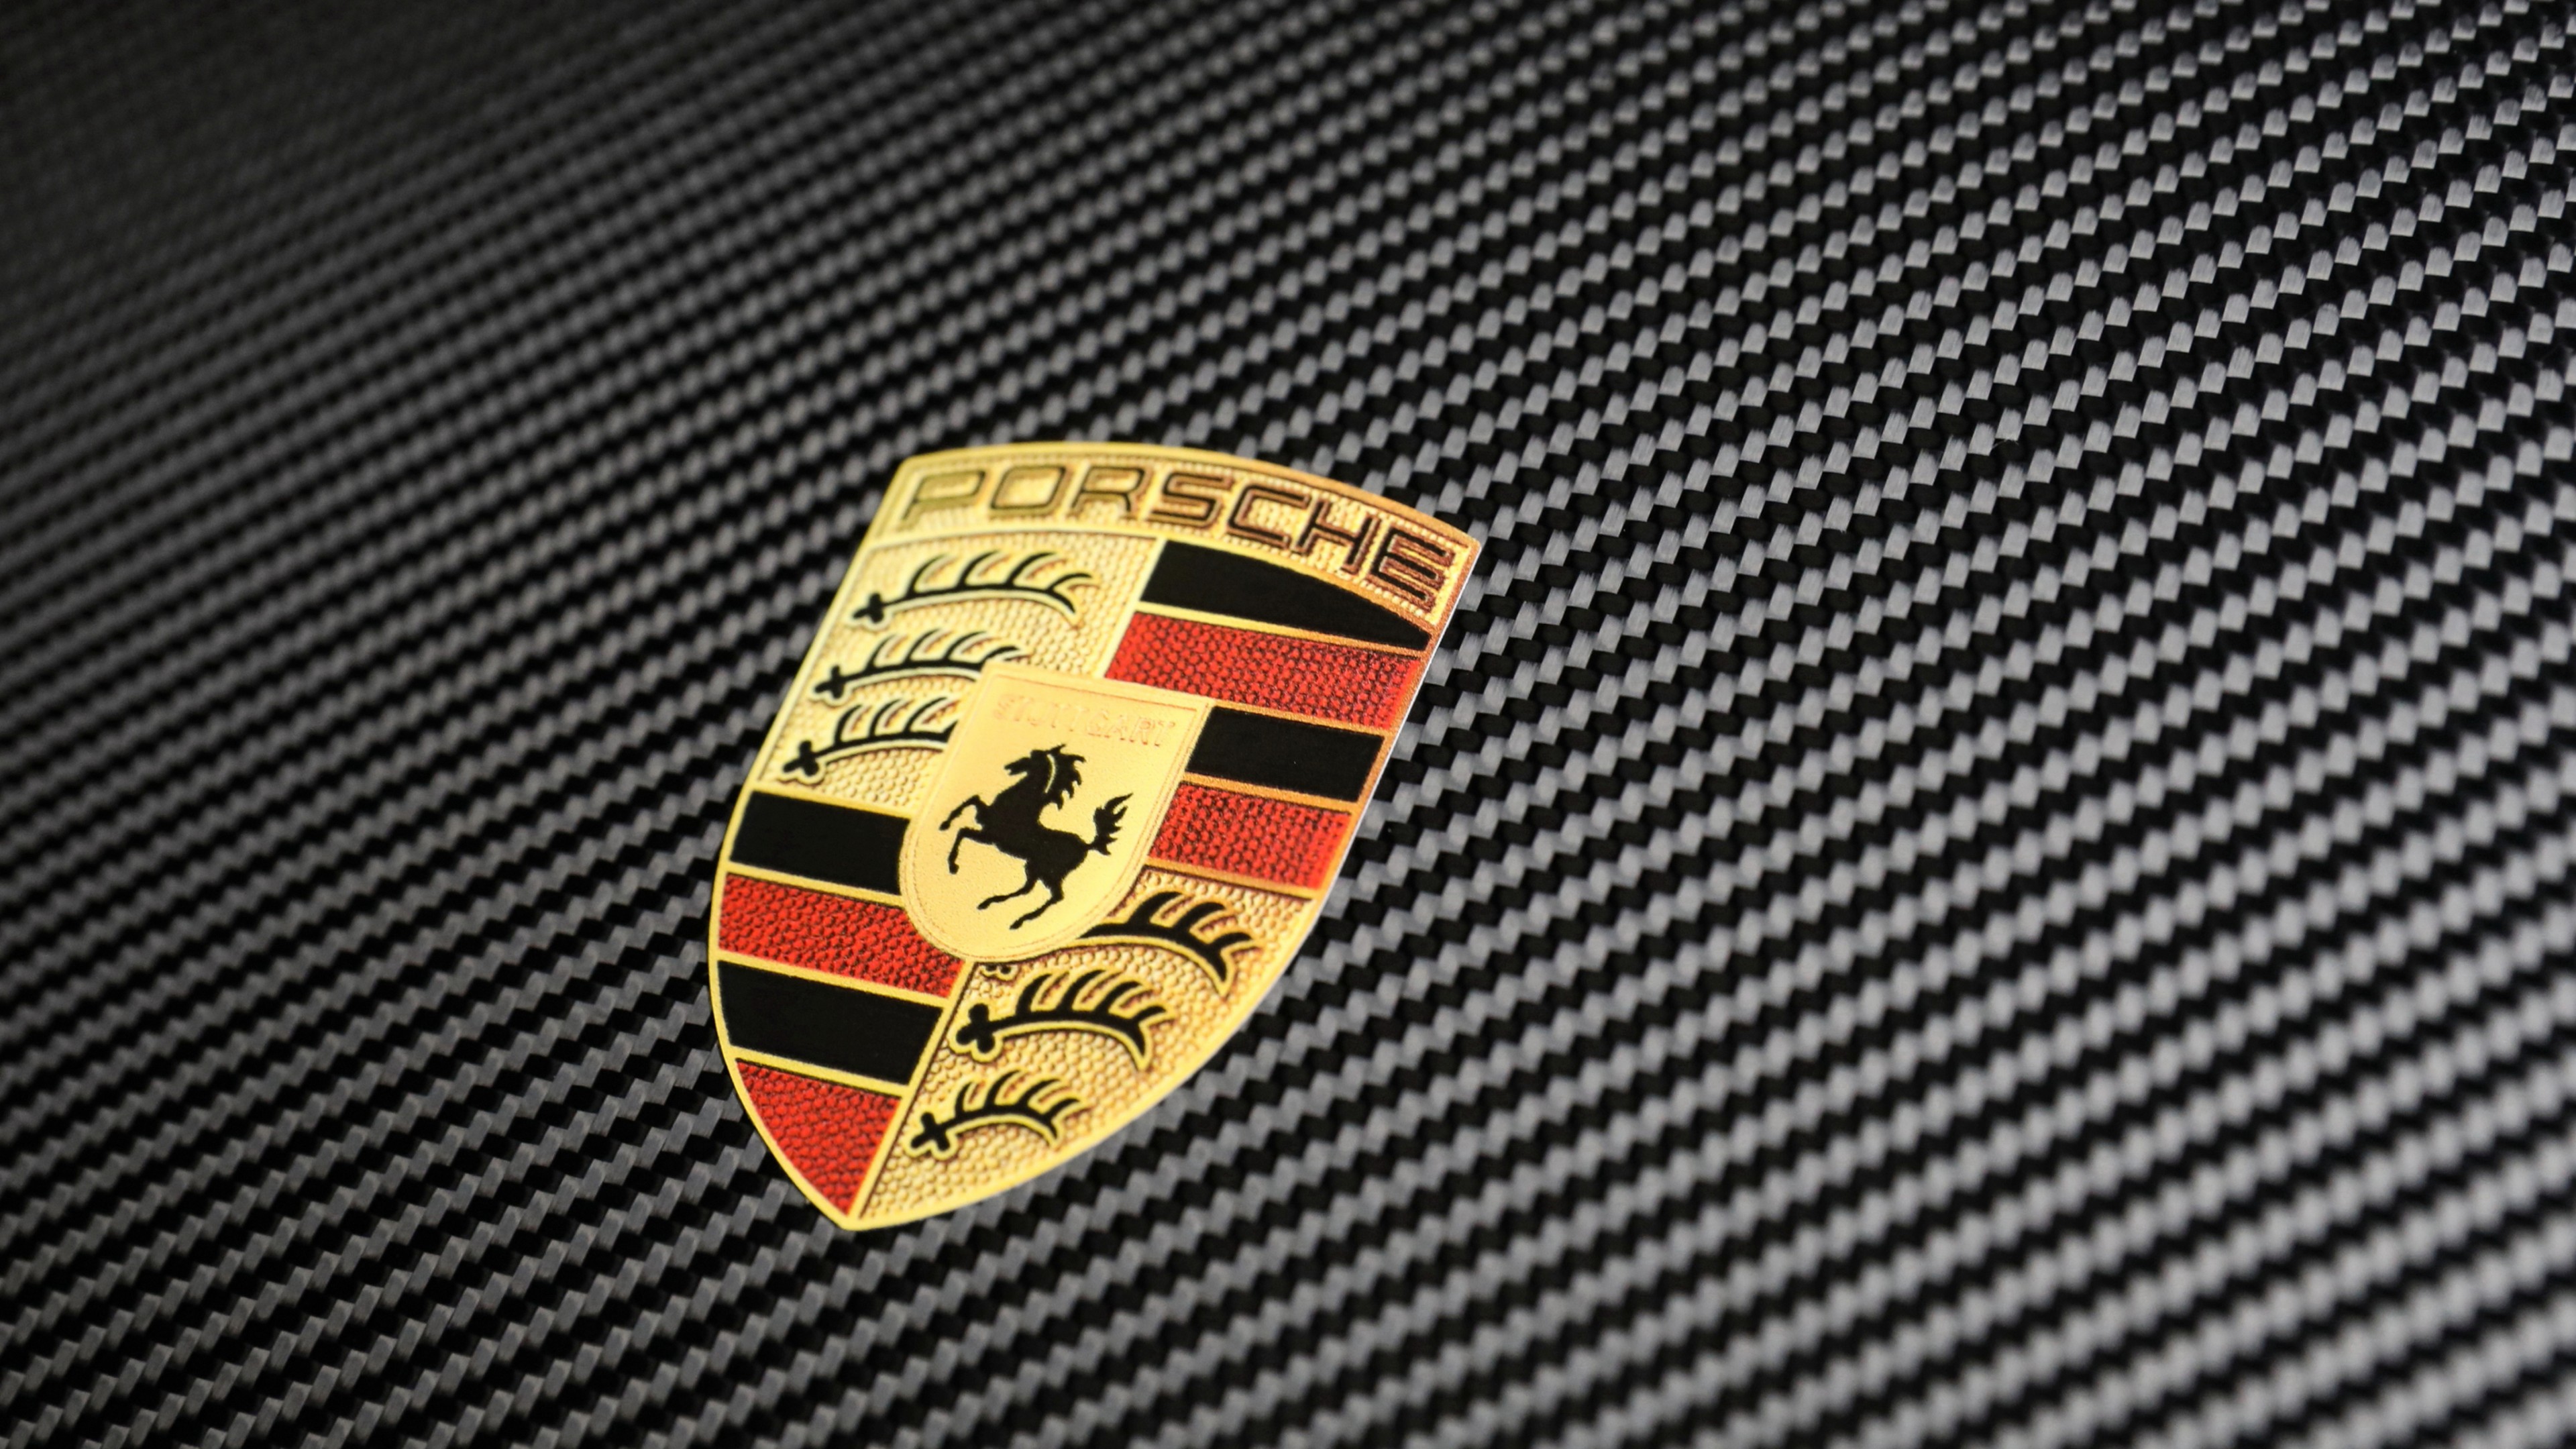 Porsche Logo Wallpaper - Download to your mobile from PHONEKY